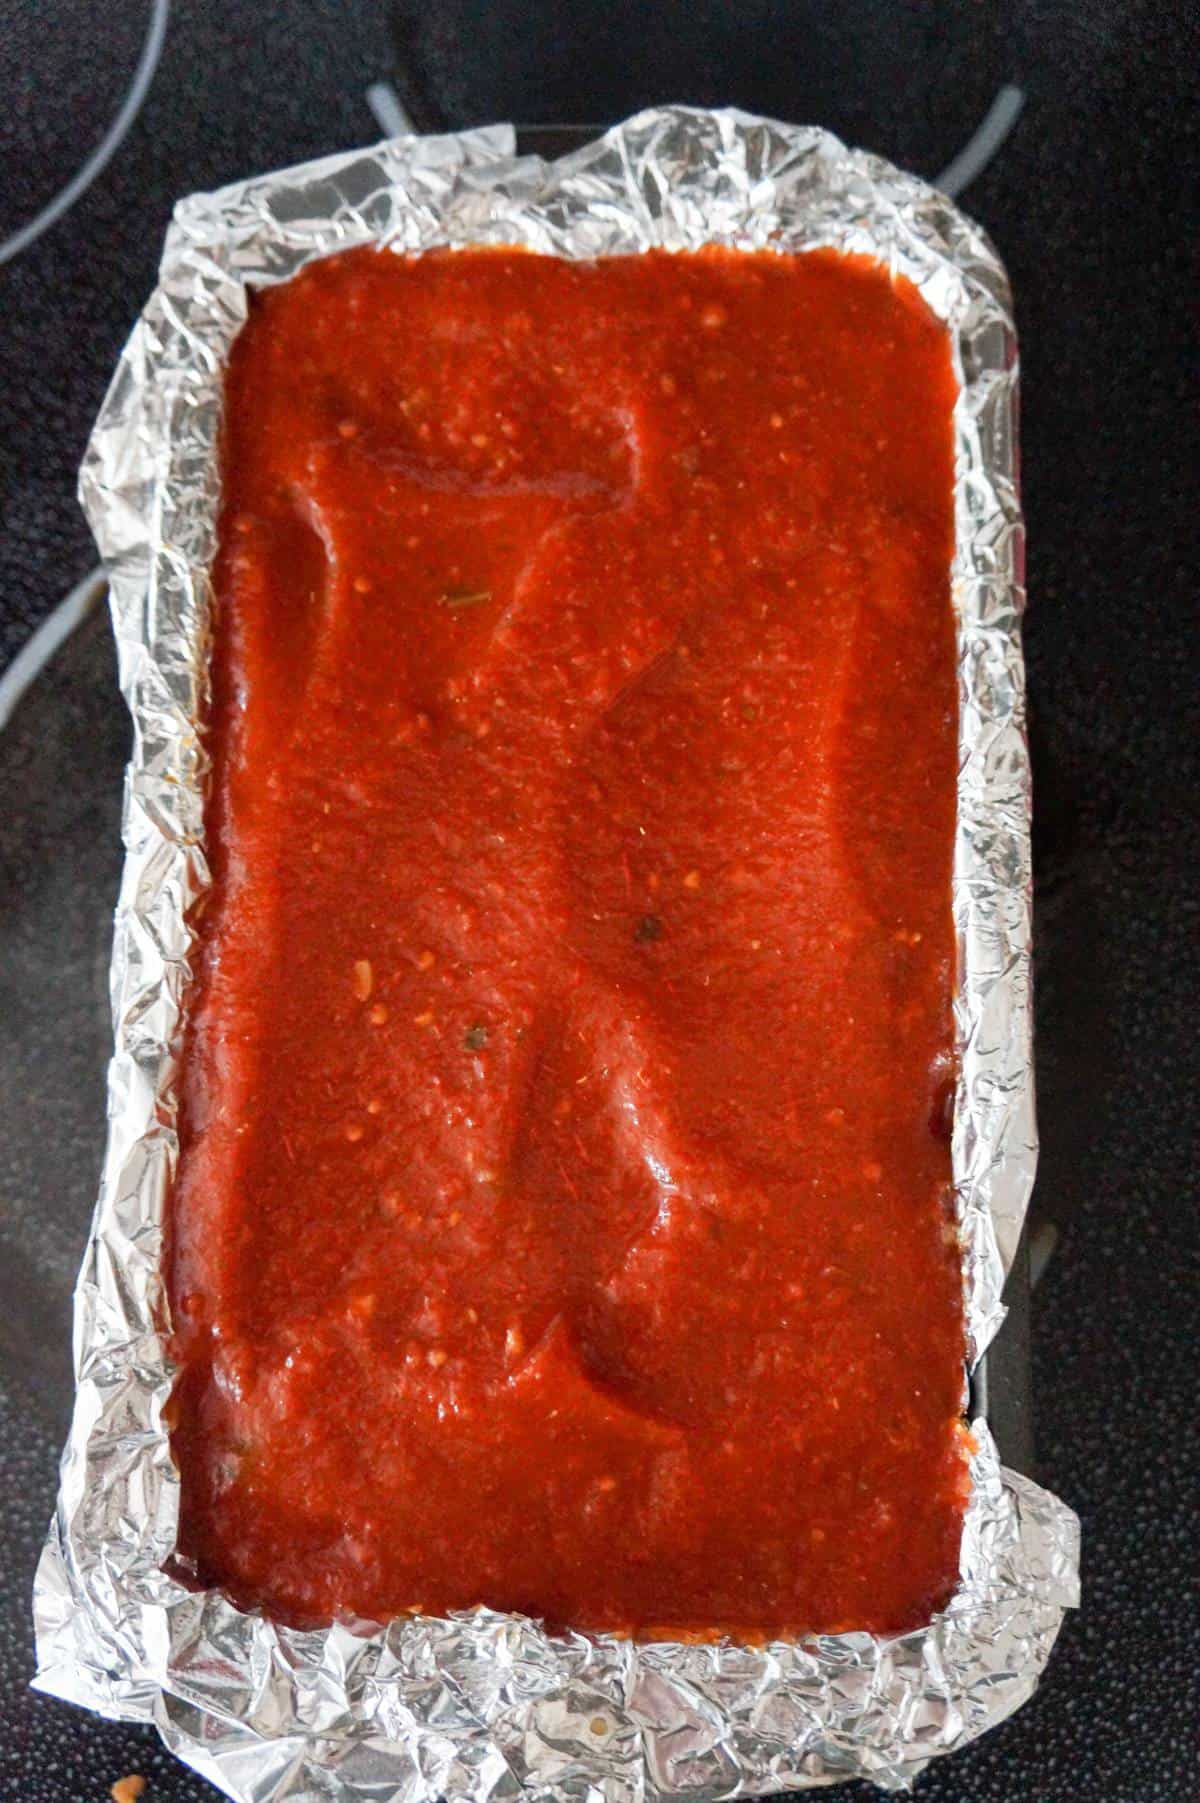 marinara sauce on top of meatloaf in a loaf pan before baking